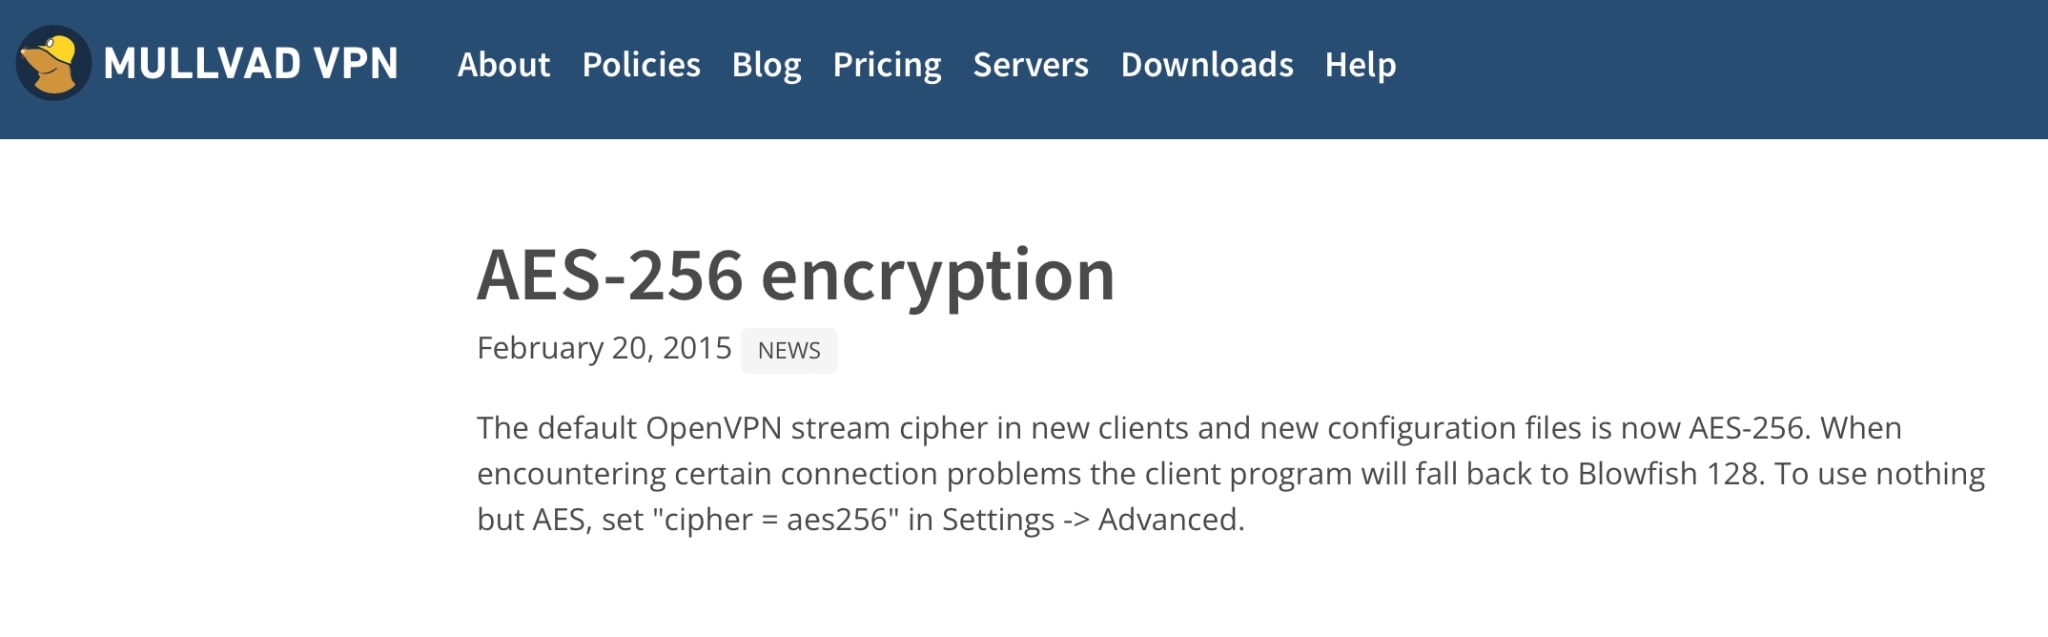 Screengrab of Mullvad VPN website page about AES-256 encryption